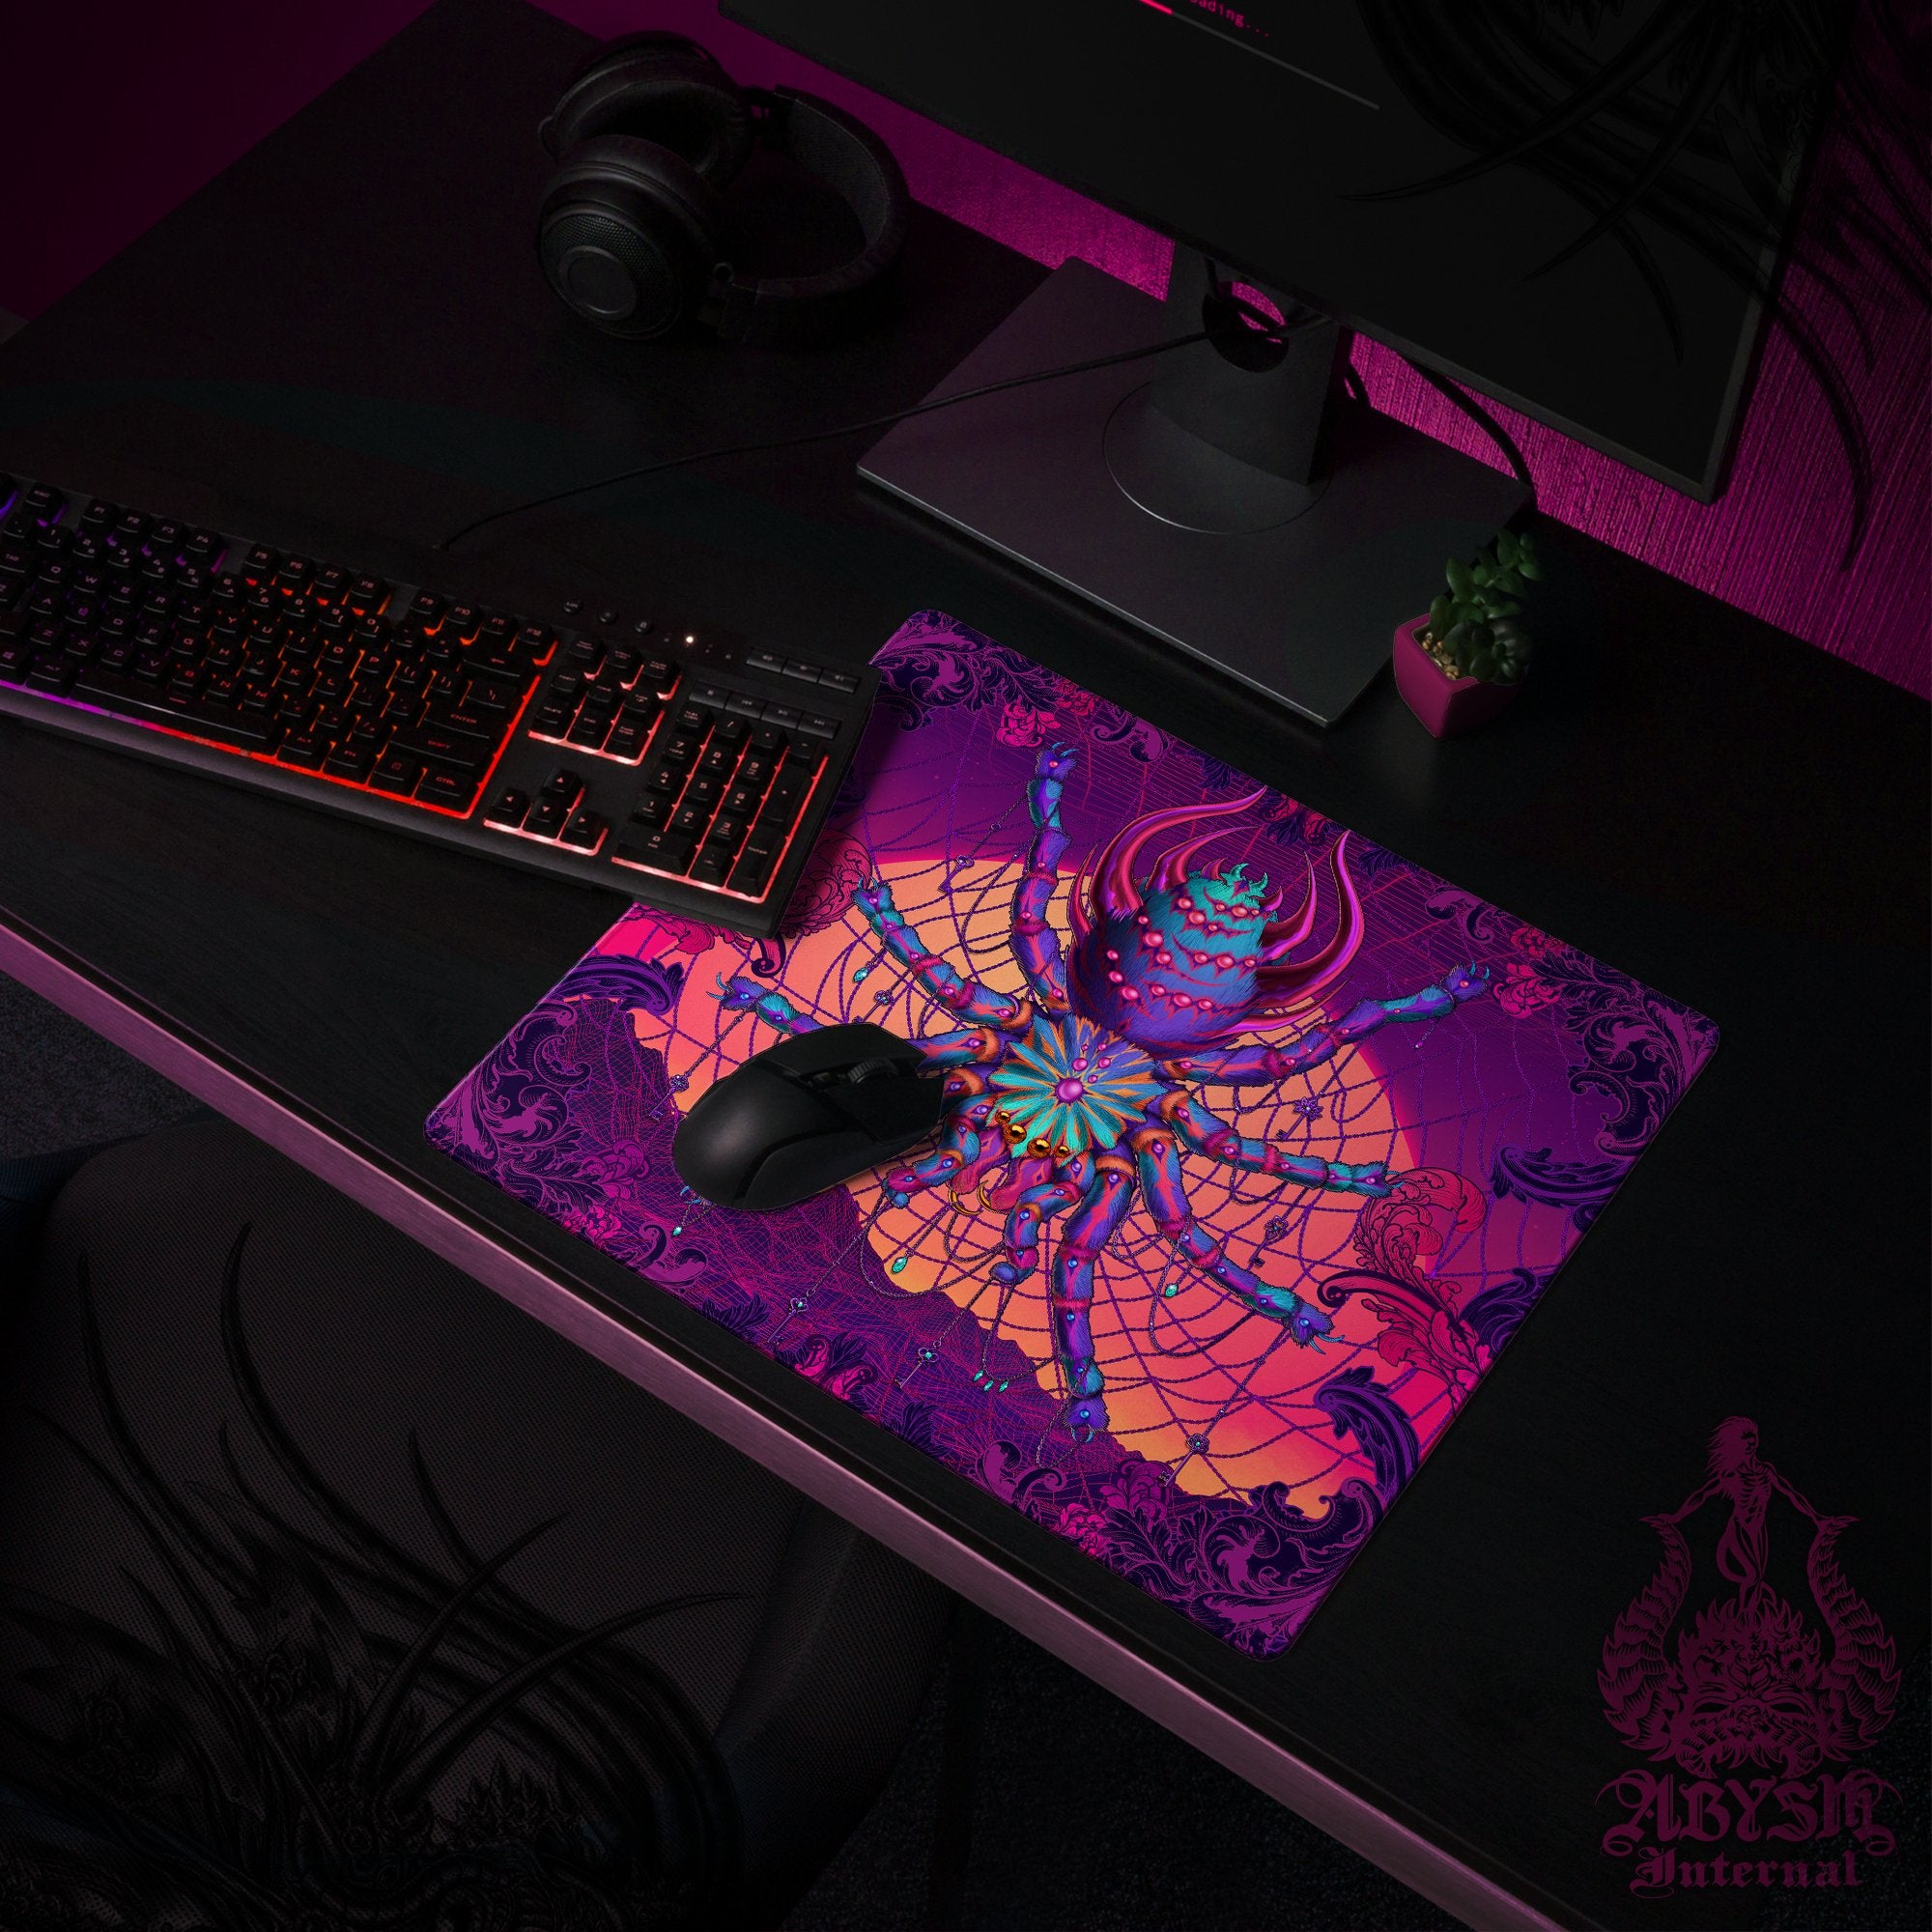 Trippy Gaming Mouse Pad, Psychedelic Desk Mat, Gamer Table Protector Cover, Workpad, Vaporwave Tarantula Art Print - Abysm Internal